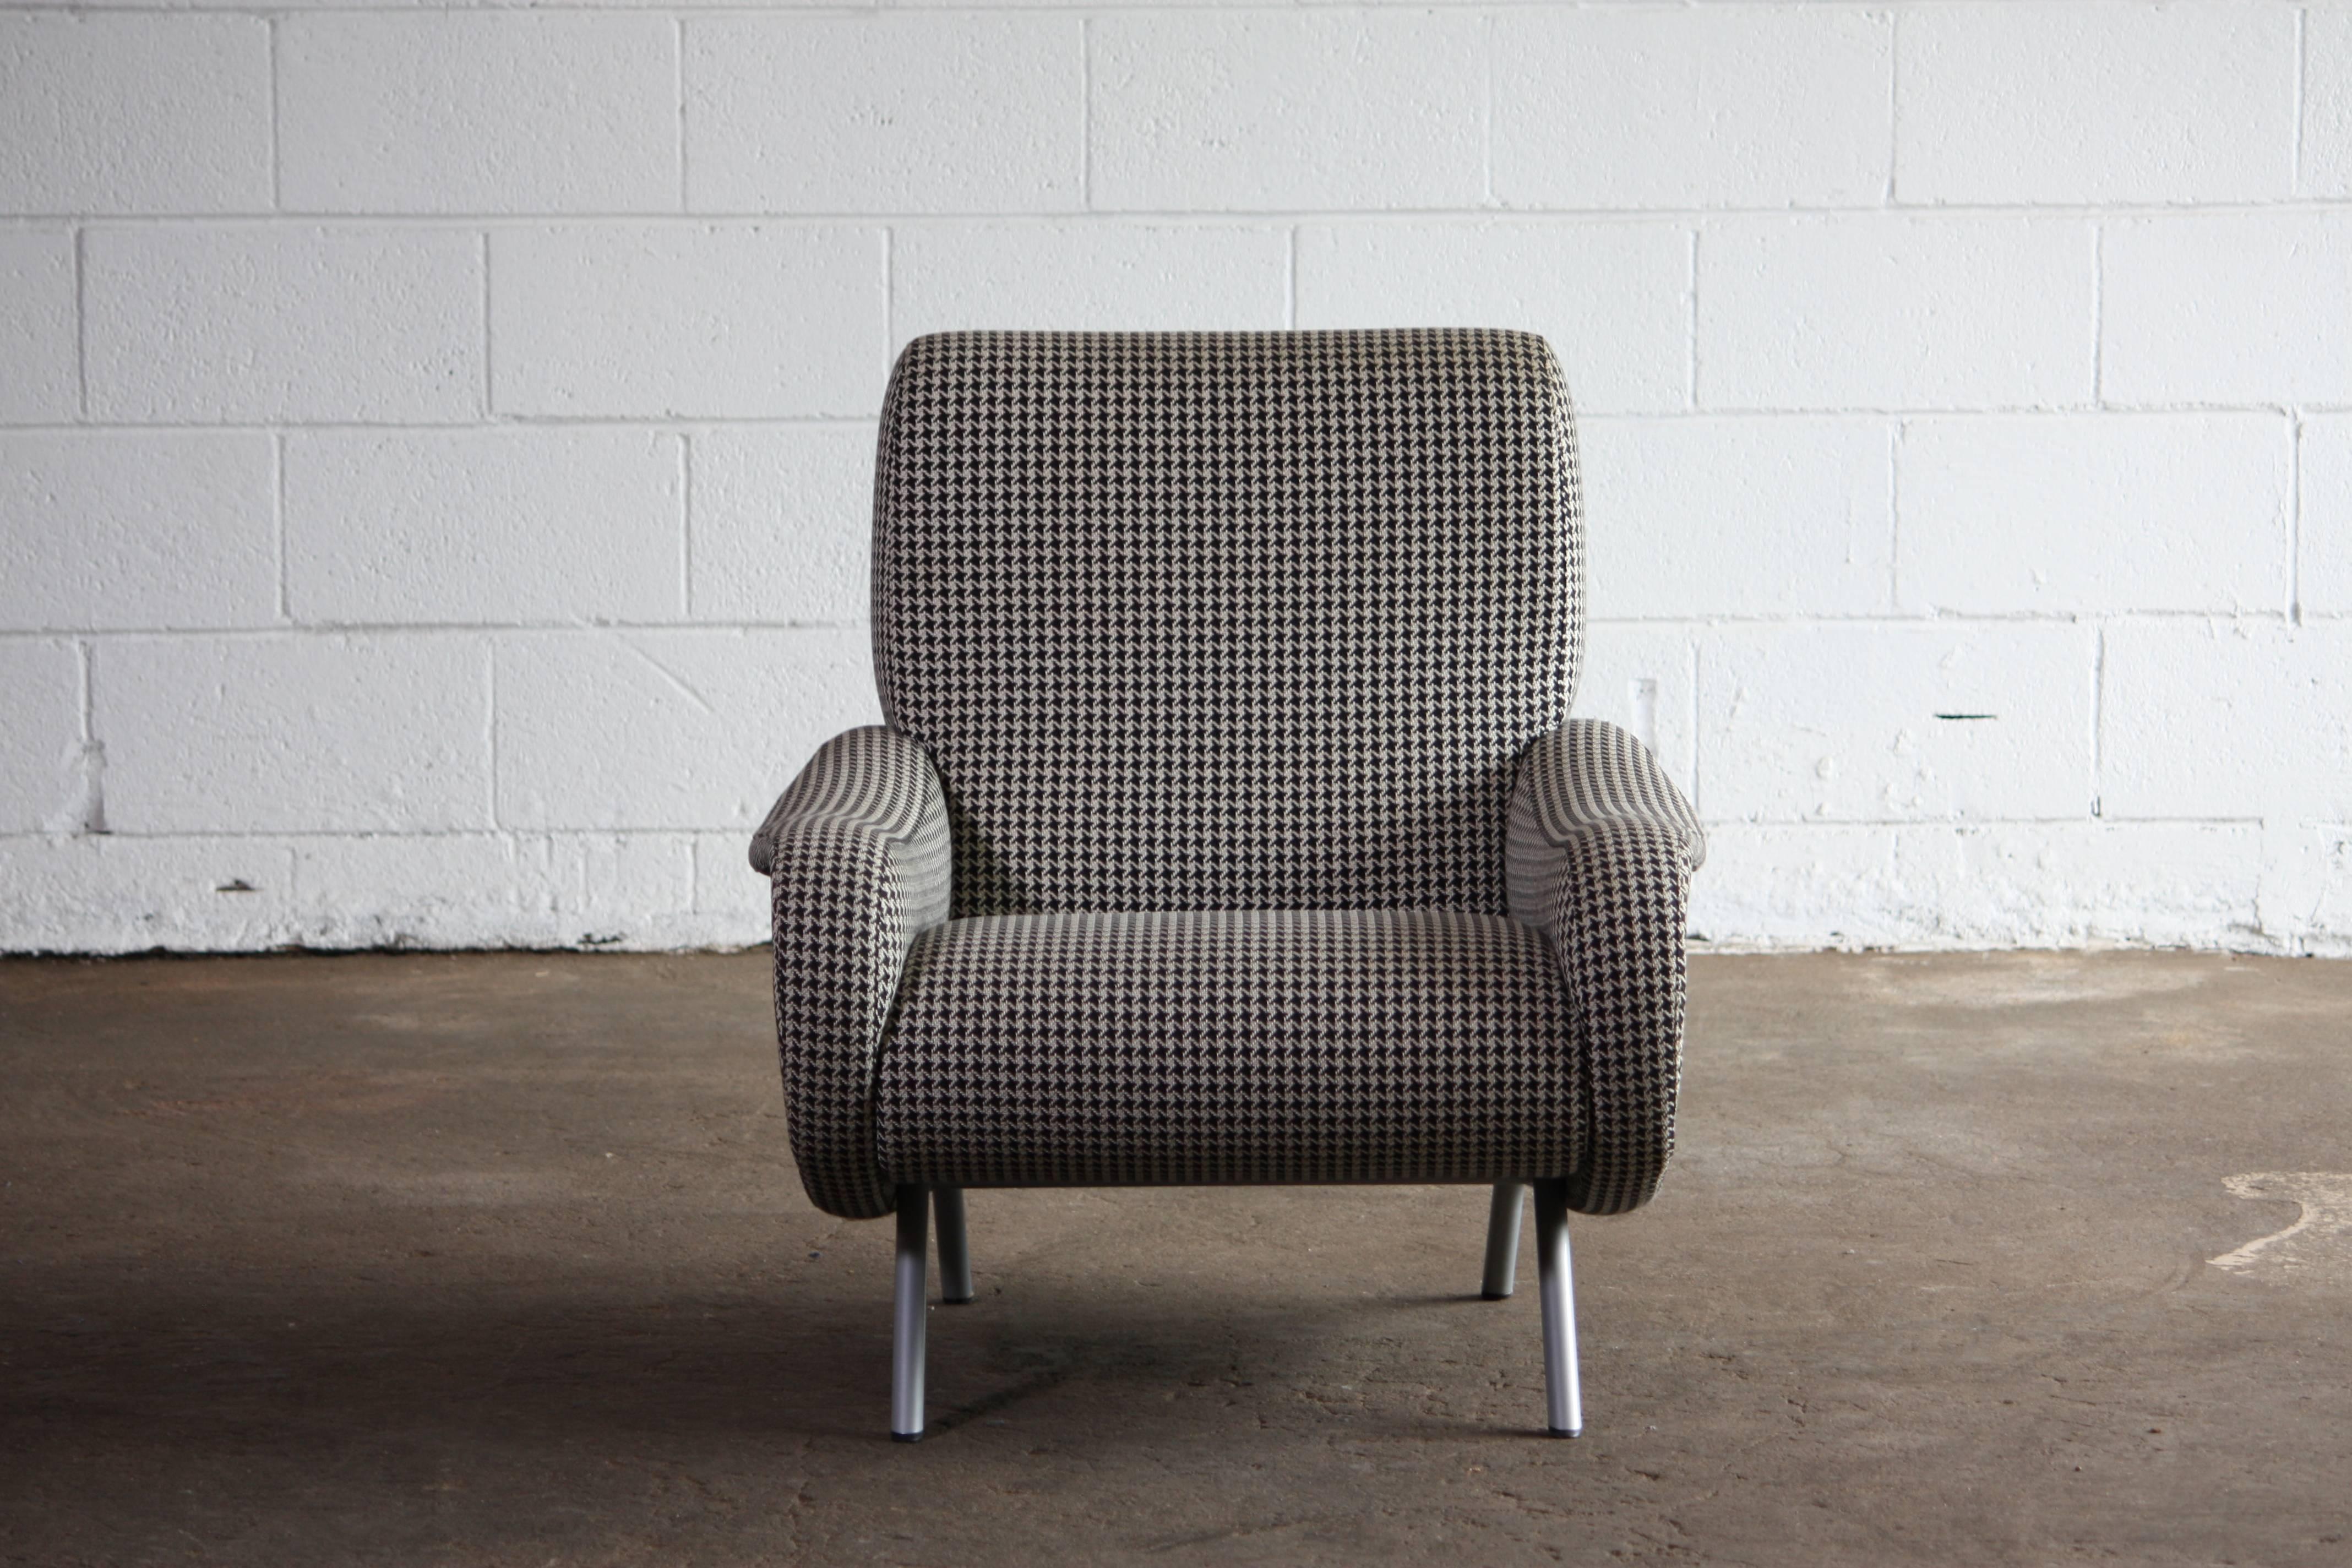 Amazing armchair upholstered in the original black and white hounds tooth. Designed by Marco Zanuso for Arflex. Retaining original labelling and glides.